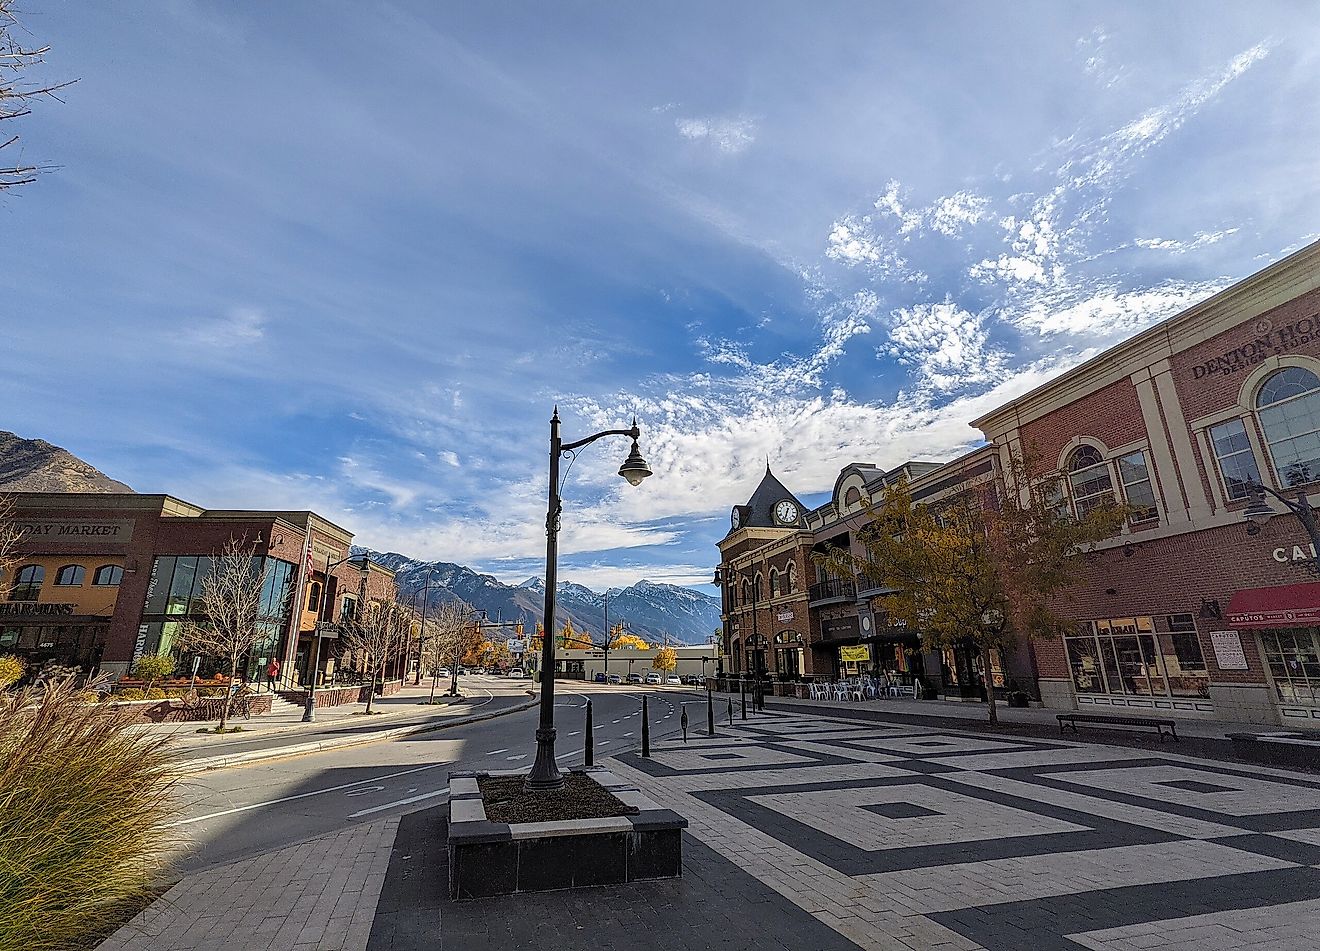 Downtown Holladay, Utah. Image credit Derrellwilliams, CC BY-SA 4.0 <https://creativecommons.org/licenses/by-sa/4.0>, via Wikimedia Commons